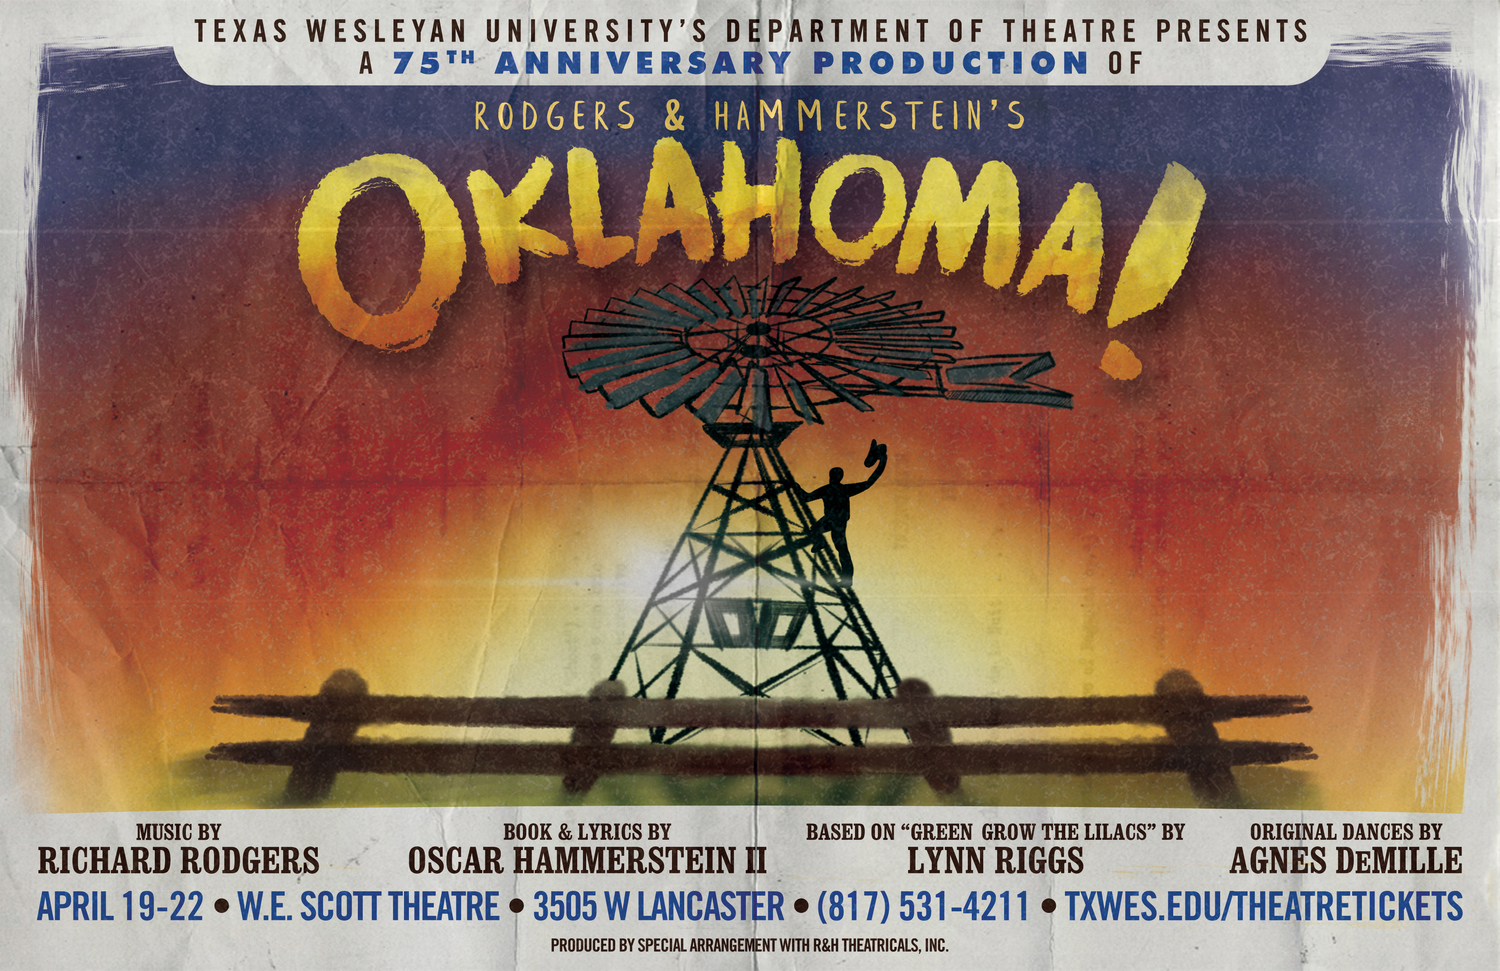 Theatre Wesleyan to present 75th Anniversary Production of 'OKLAHOMA!' at the Scott Theatre 